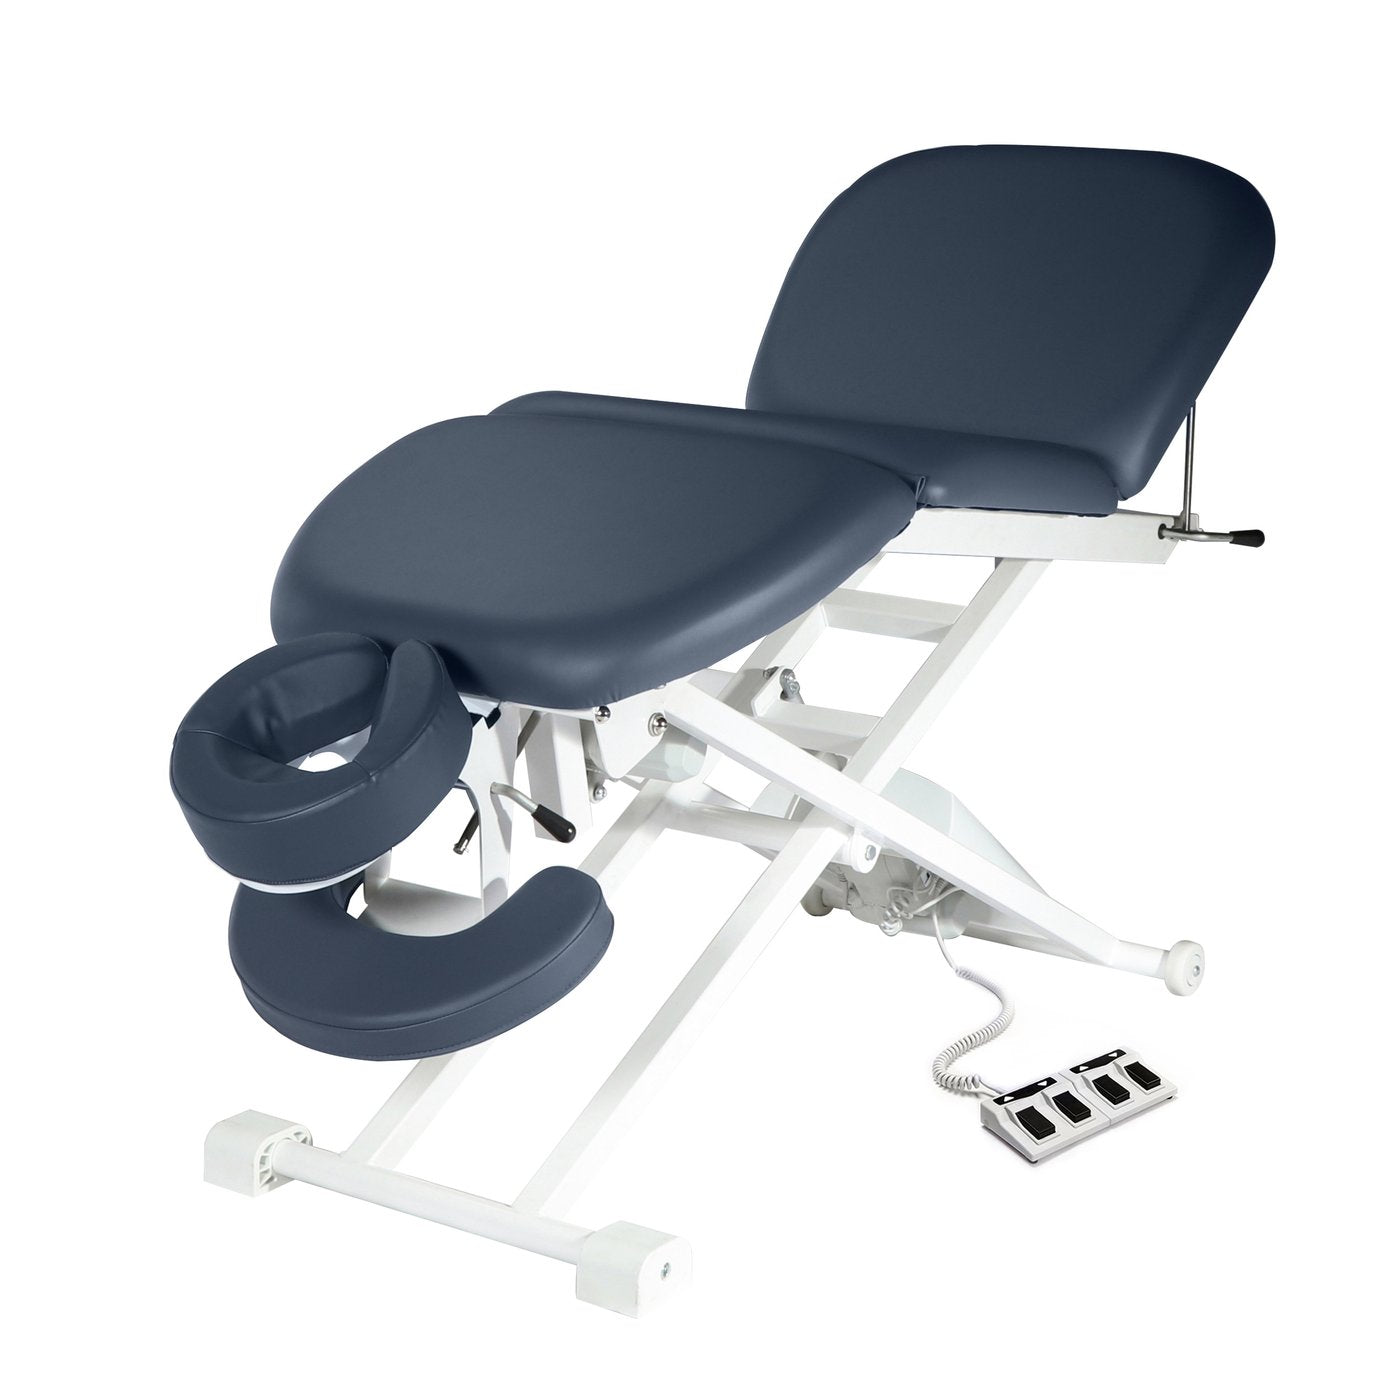 Master Massage 29” TheraMaster 4 Section Electric Bodywork Table - Royal Blue